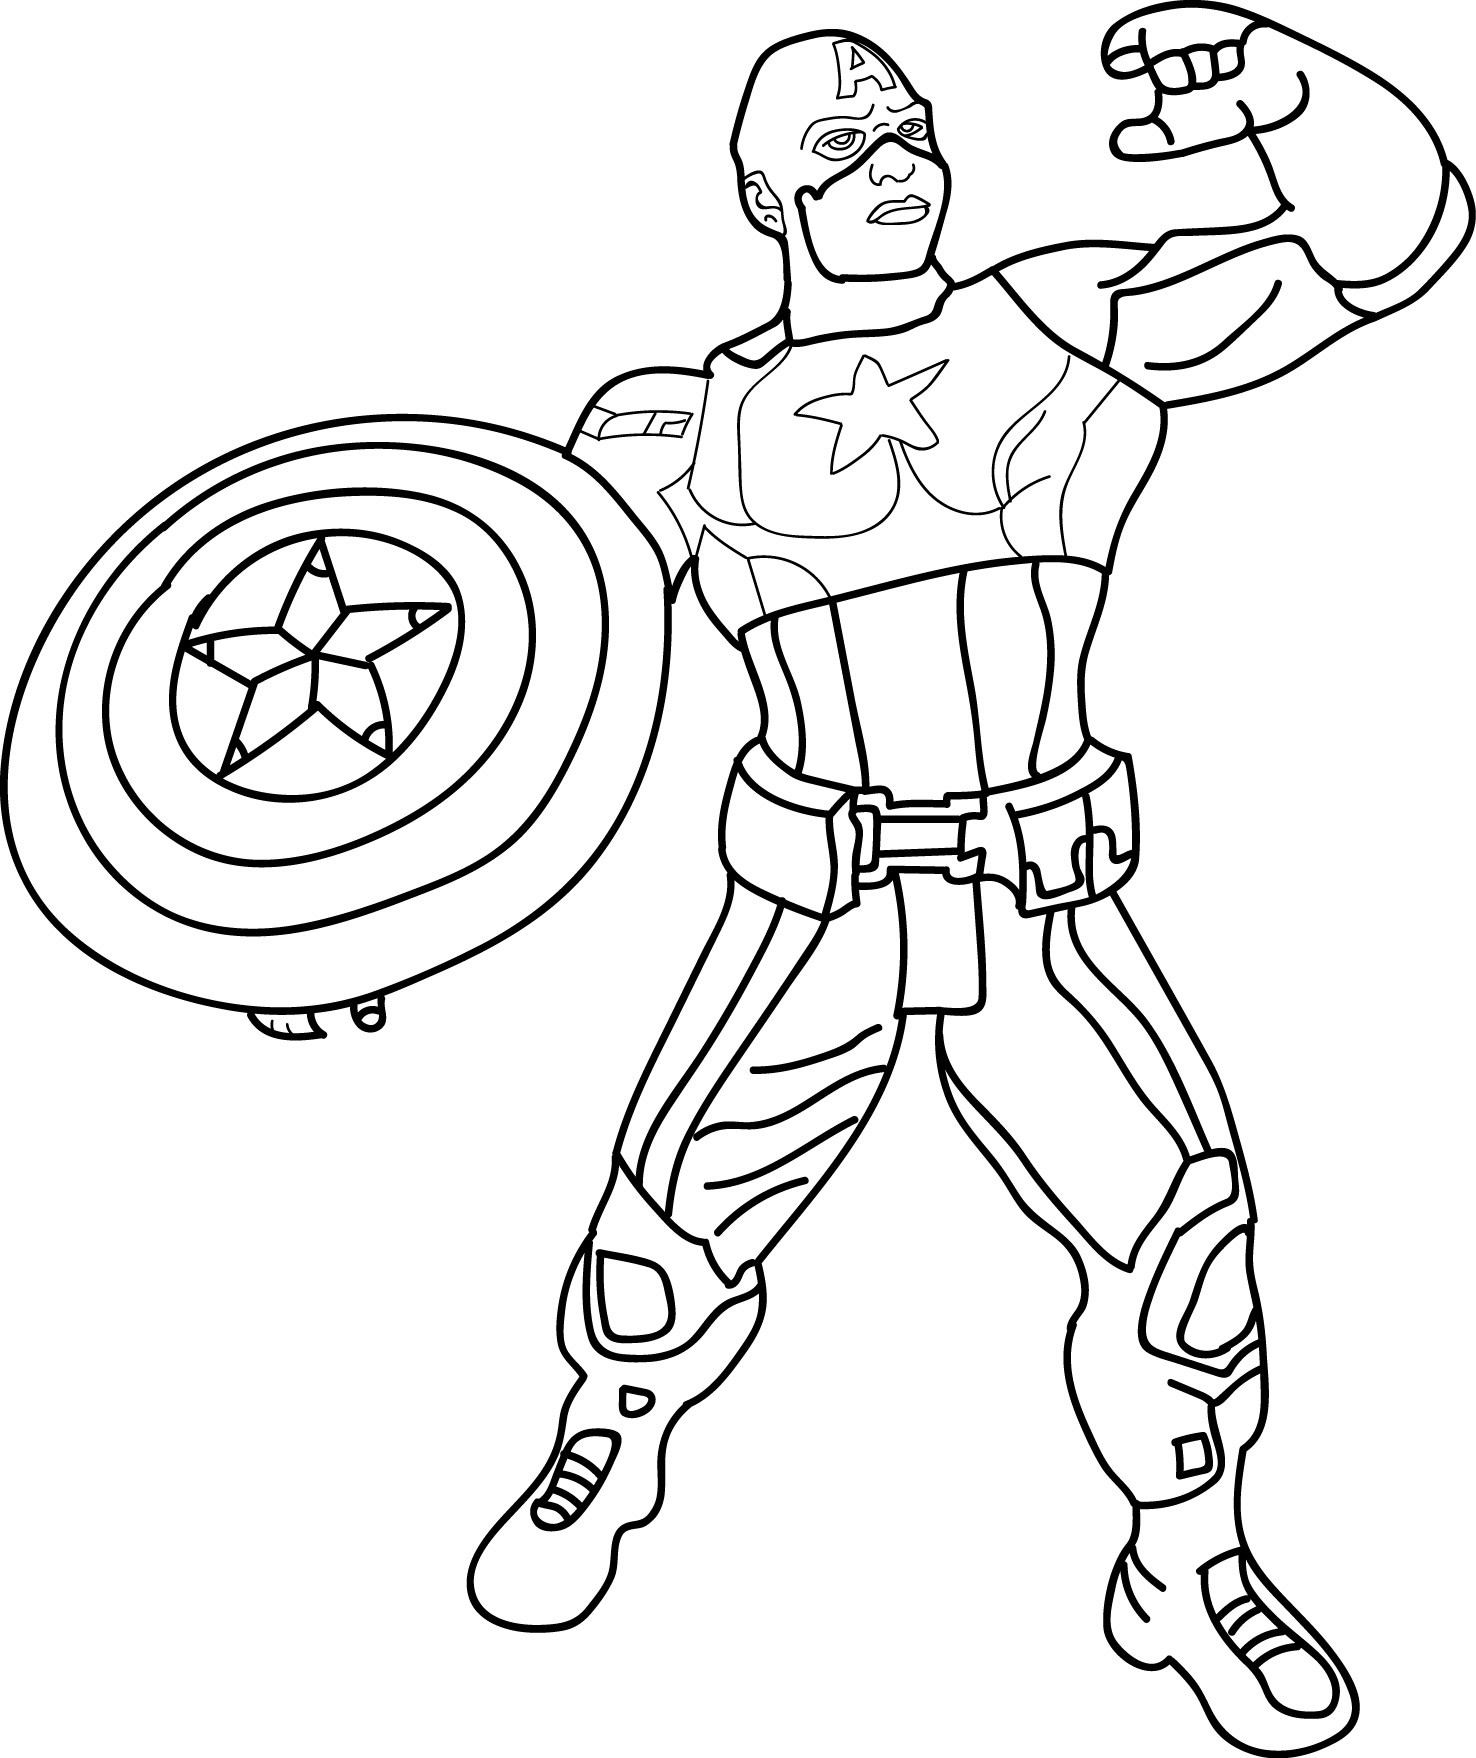 Captain America Lego Coloring Pages at GetColoringscom